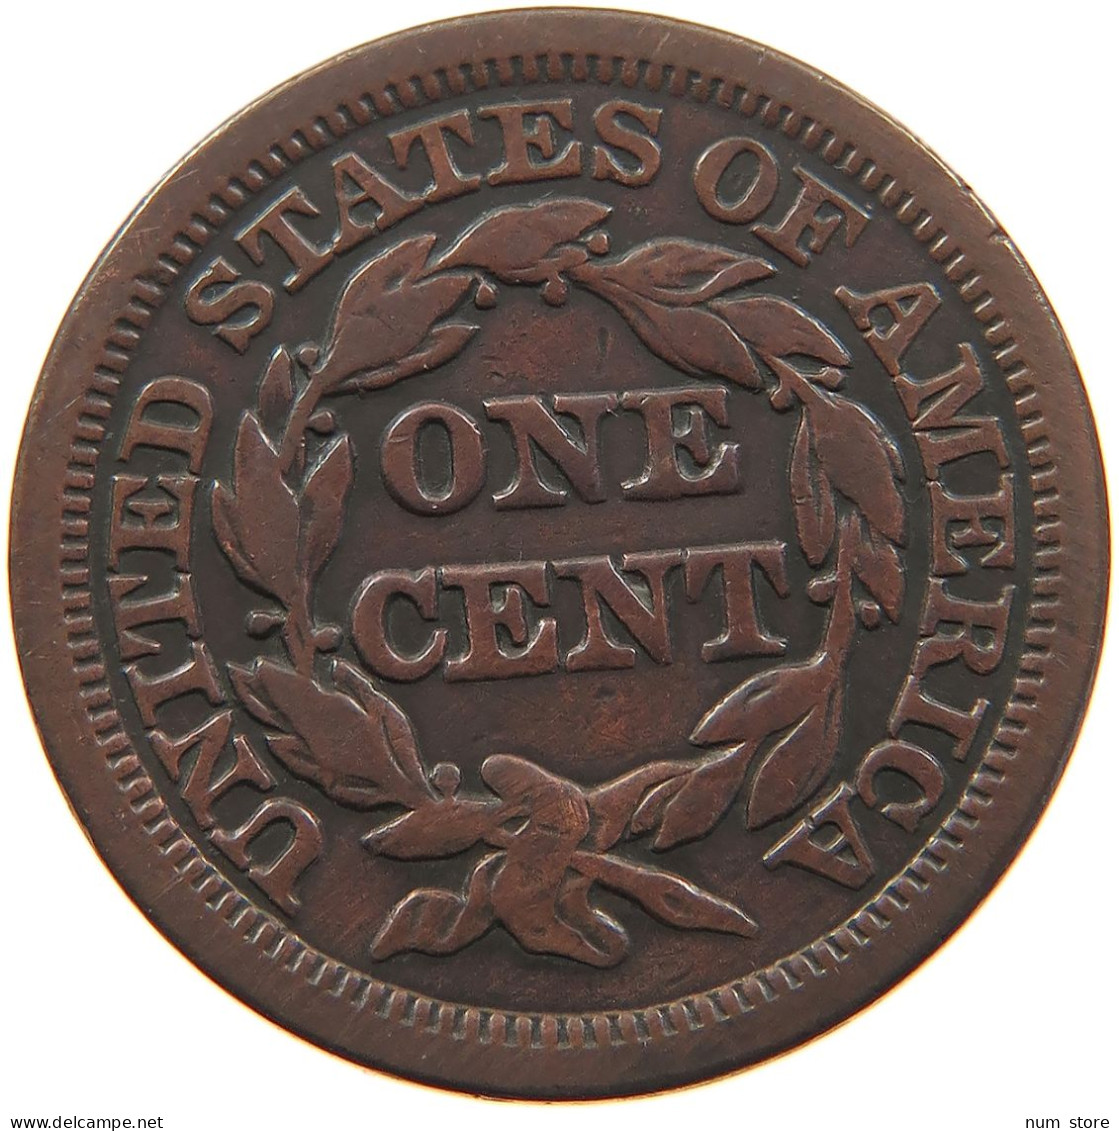 UNITED STATES OF AMERICA LARGE CENT 1845 Braided Hair #t143 0413 - 1840-1857: Braided Hair